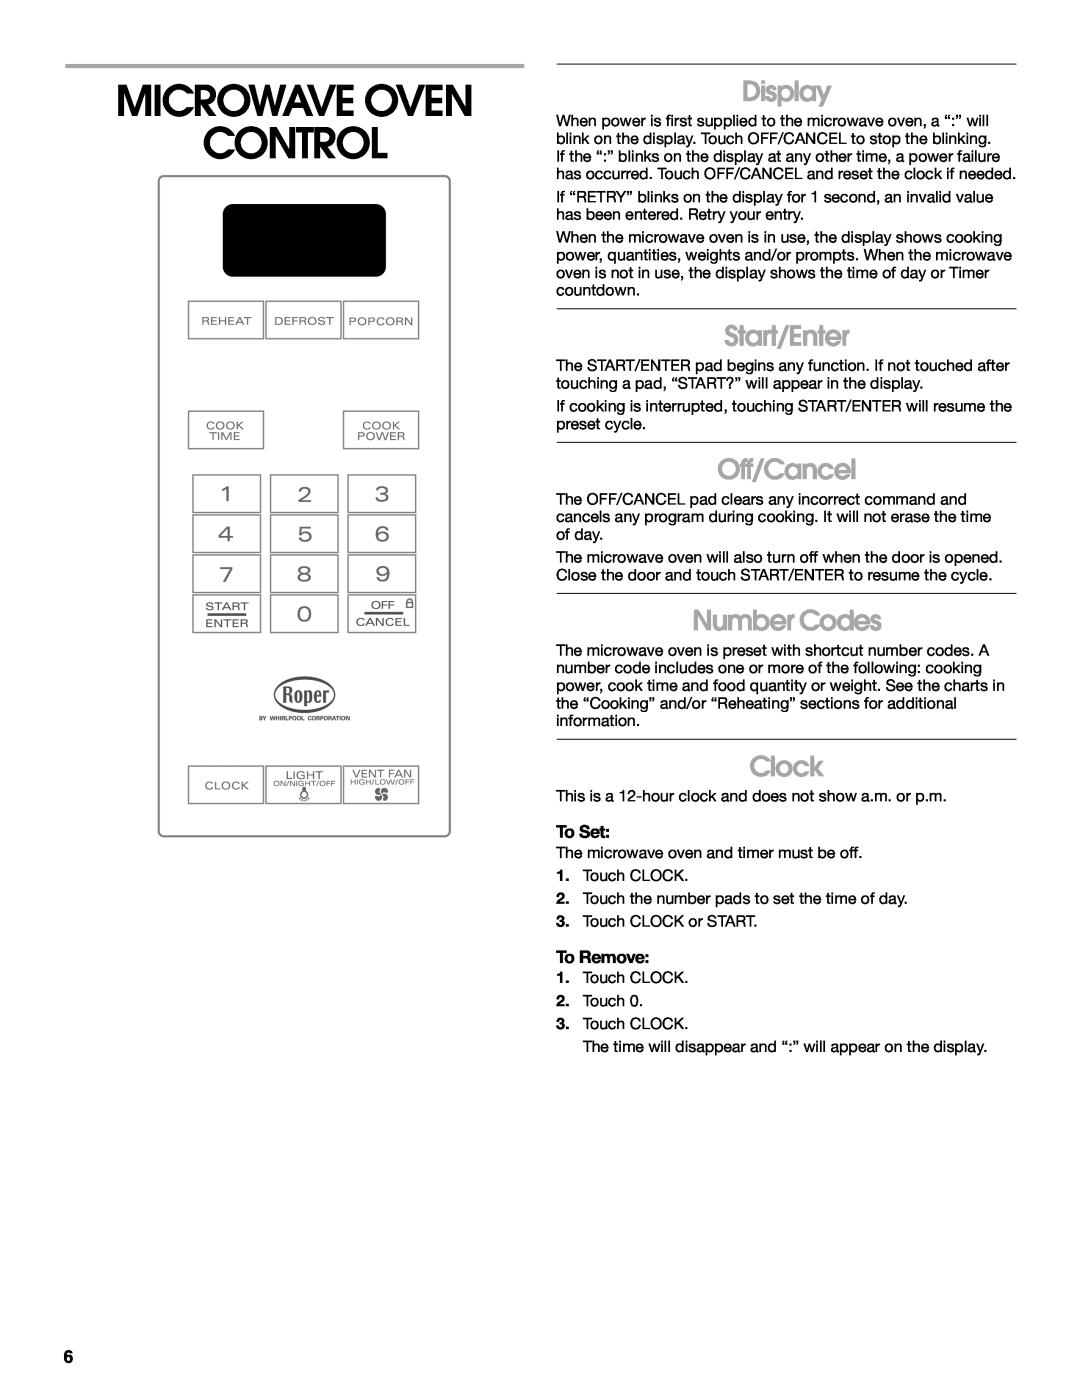 Whirlpool MHE14XM manual Microwave Oven Control, Display, Start/Enter, Off/Cancel, Number Codes, Clock, To Set, To Remove 